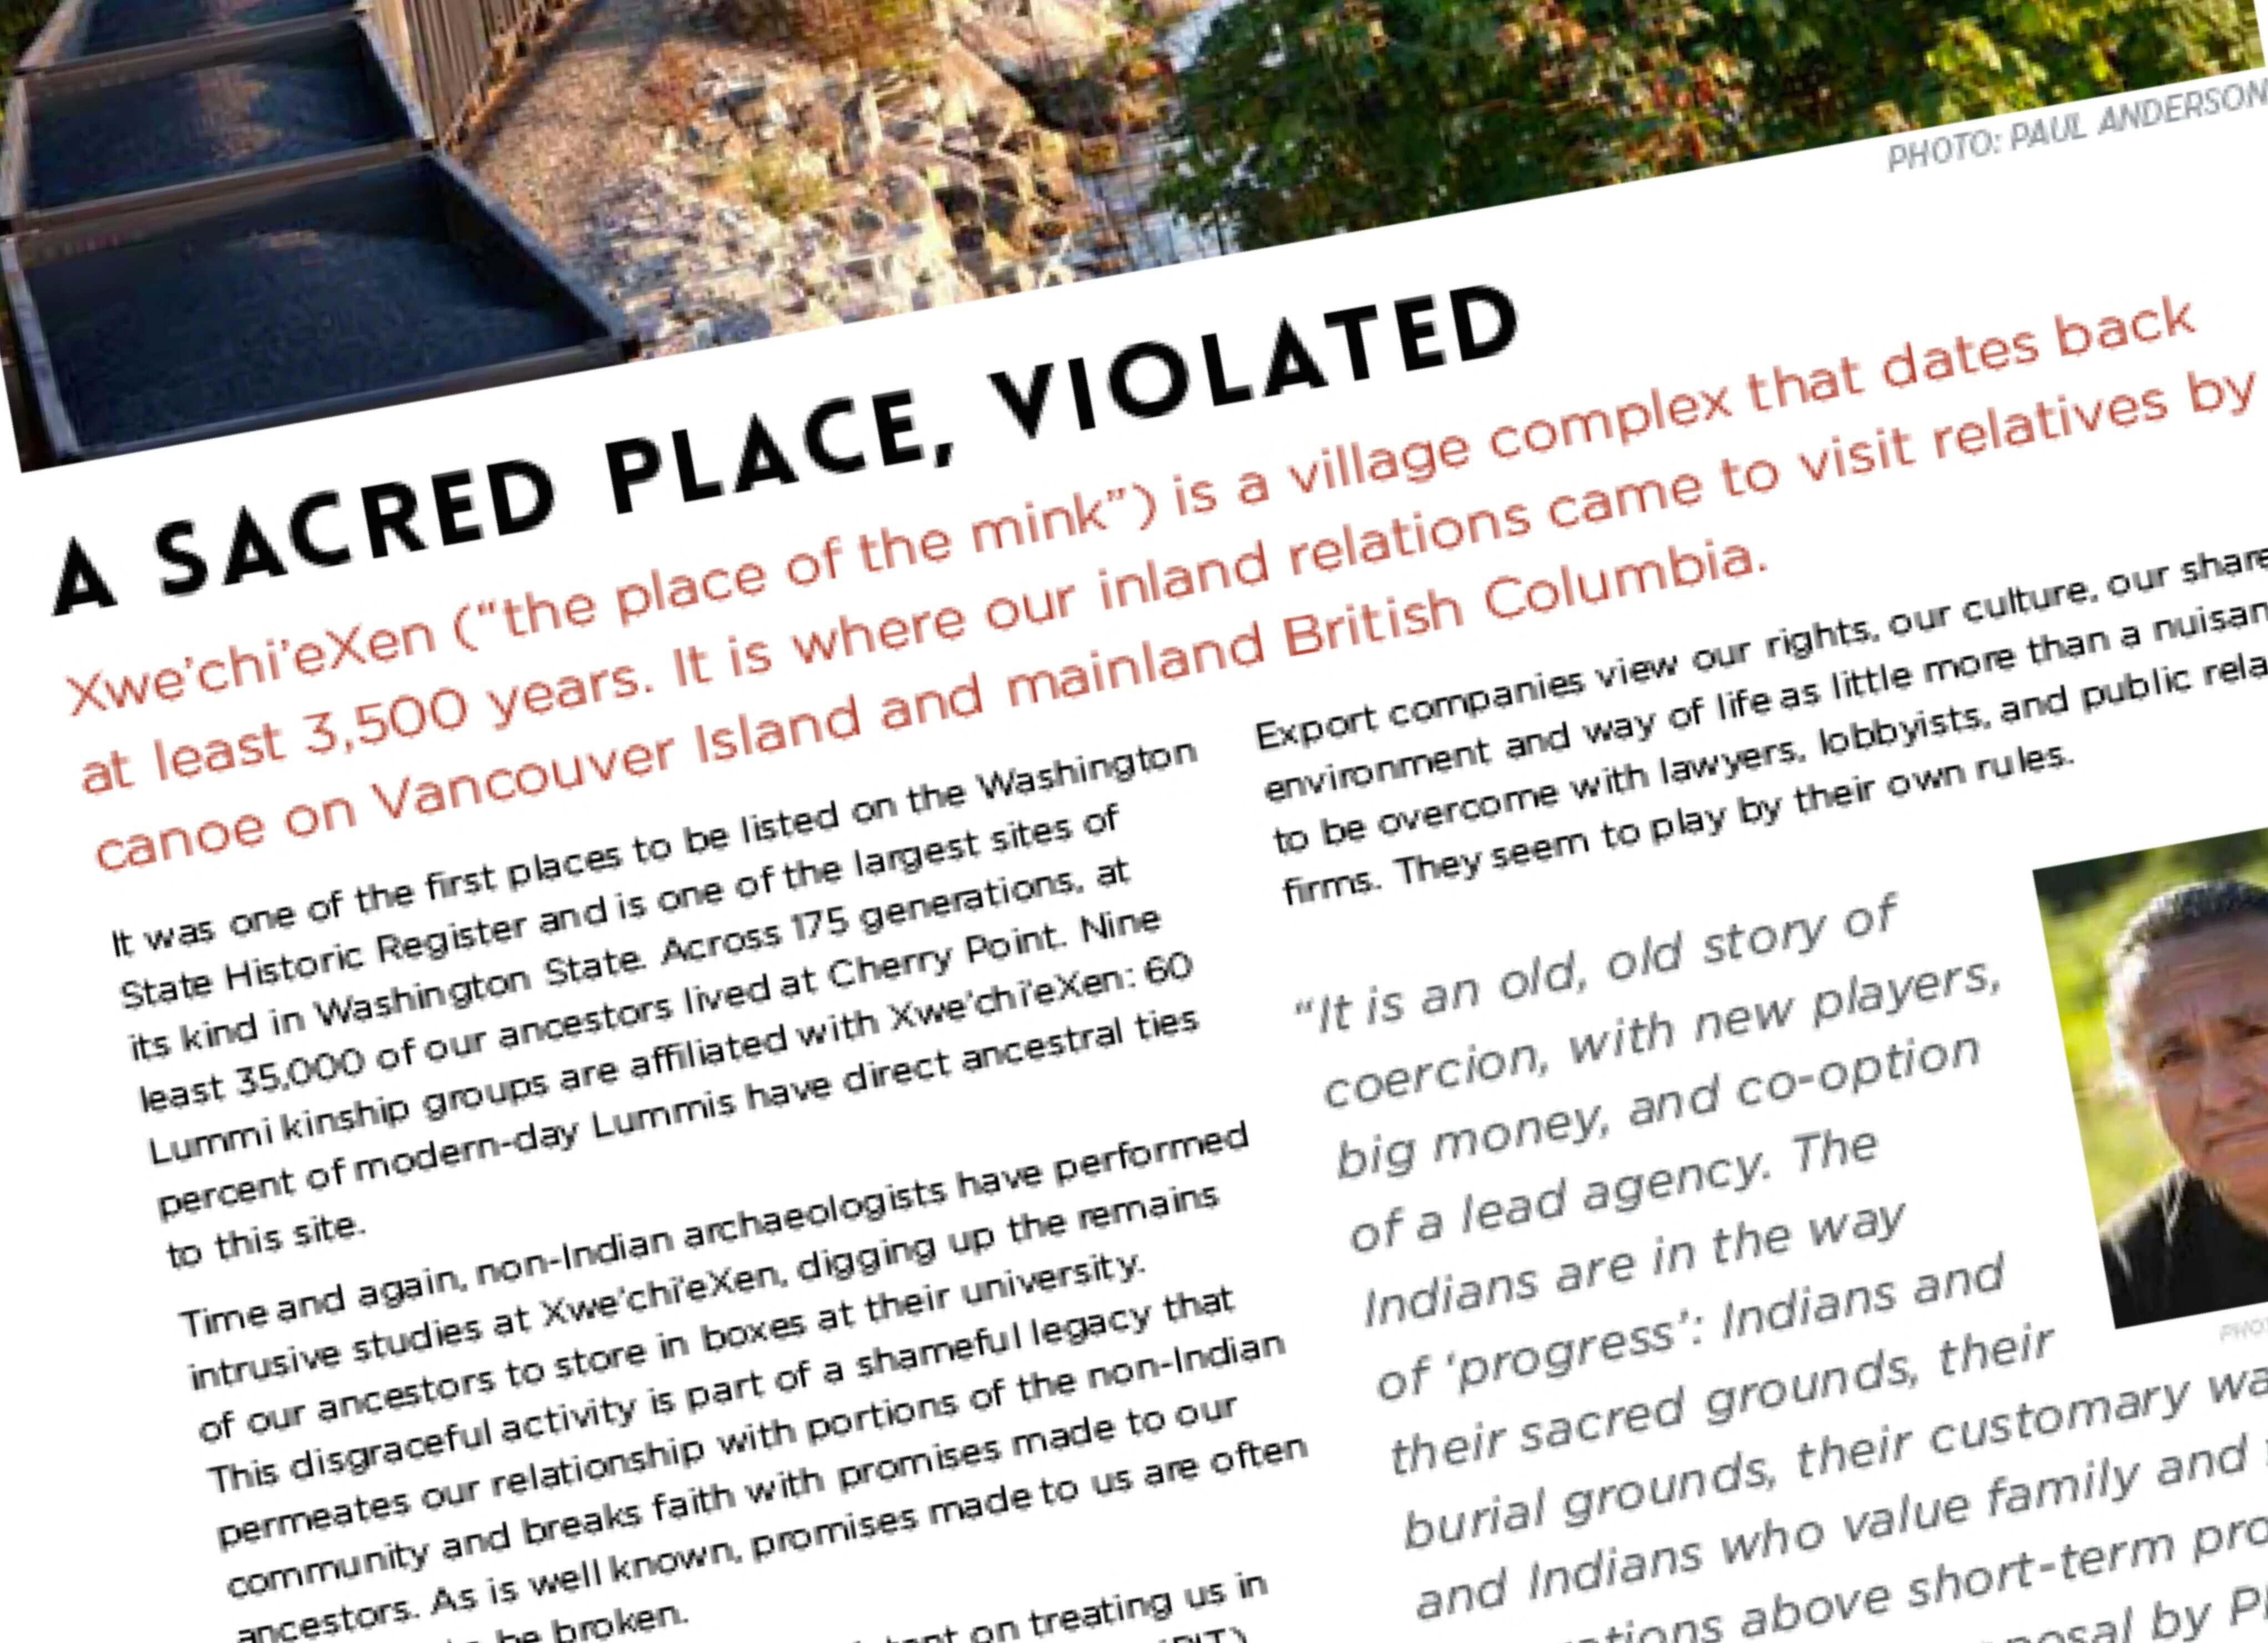 Page excerpt from “Protecting Treaty Rights, Sacred Places, and Lifeways: Coal vs. Communites,” presented by Jewell James, Lummi Tribal Member and Head Carver, Lummi Tribe’s House of Tears Carvers